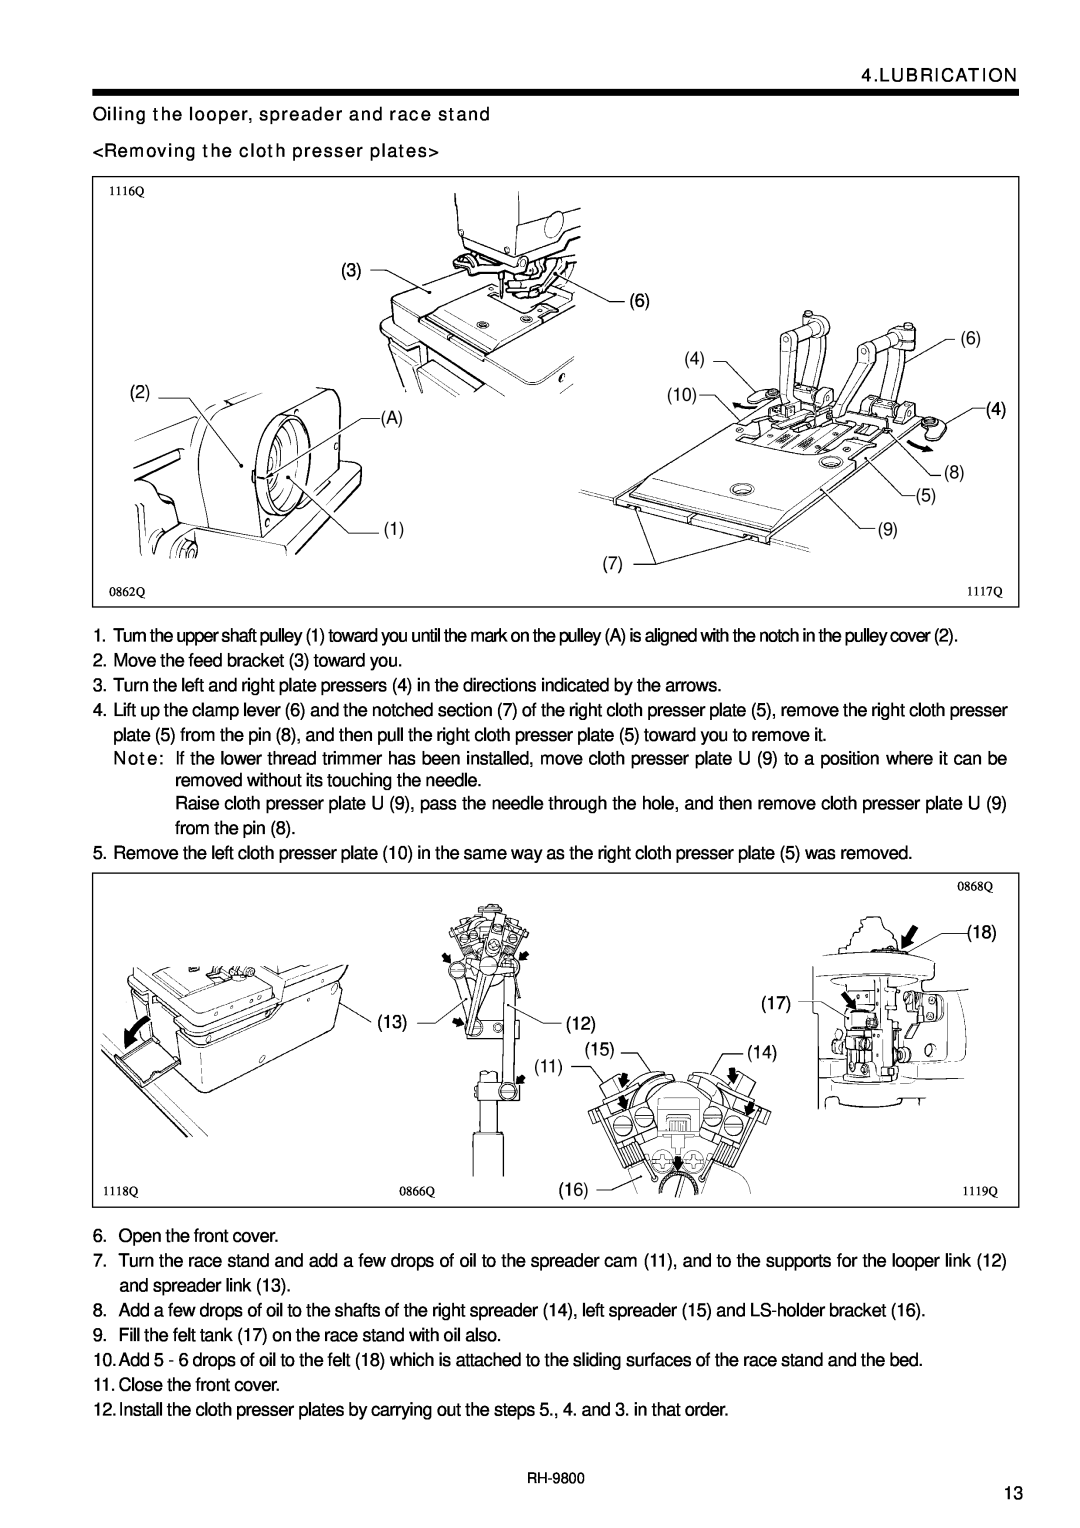 Brother DH4-B980 instruction manual Lubrication 